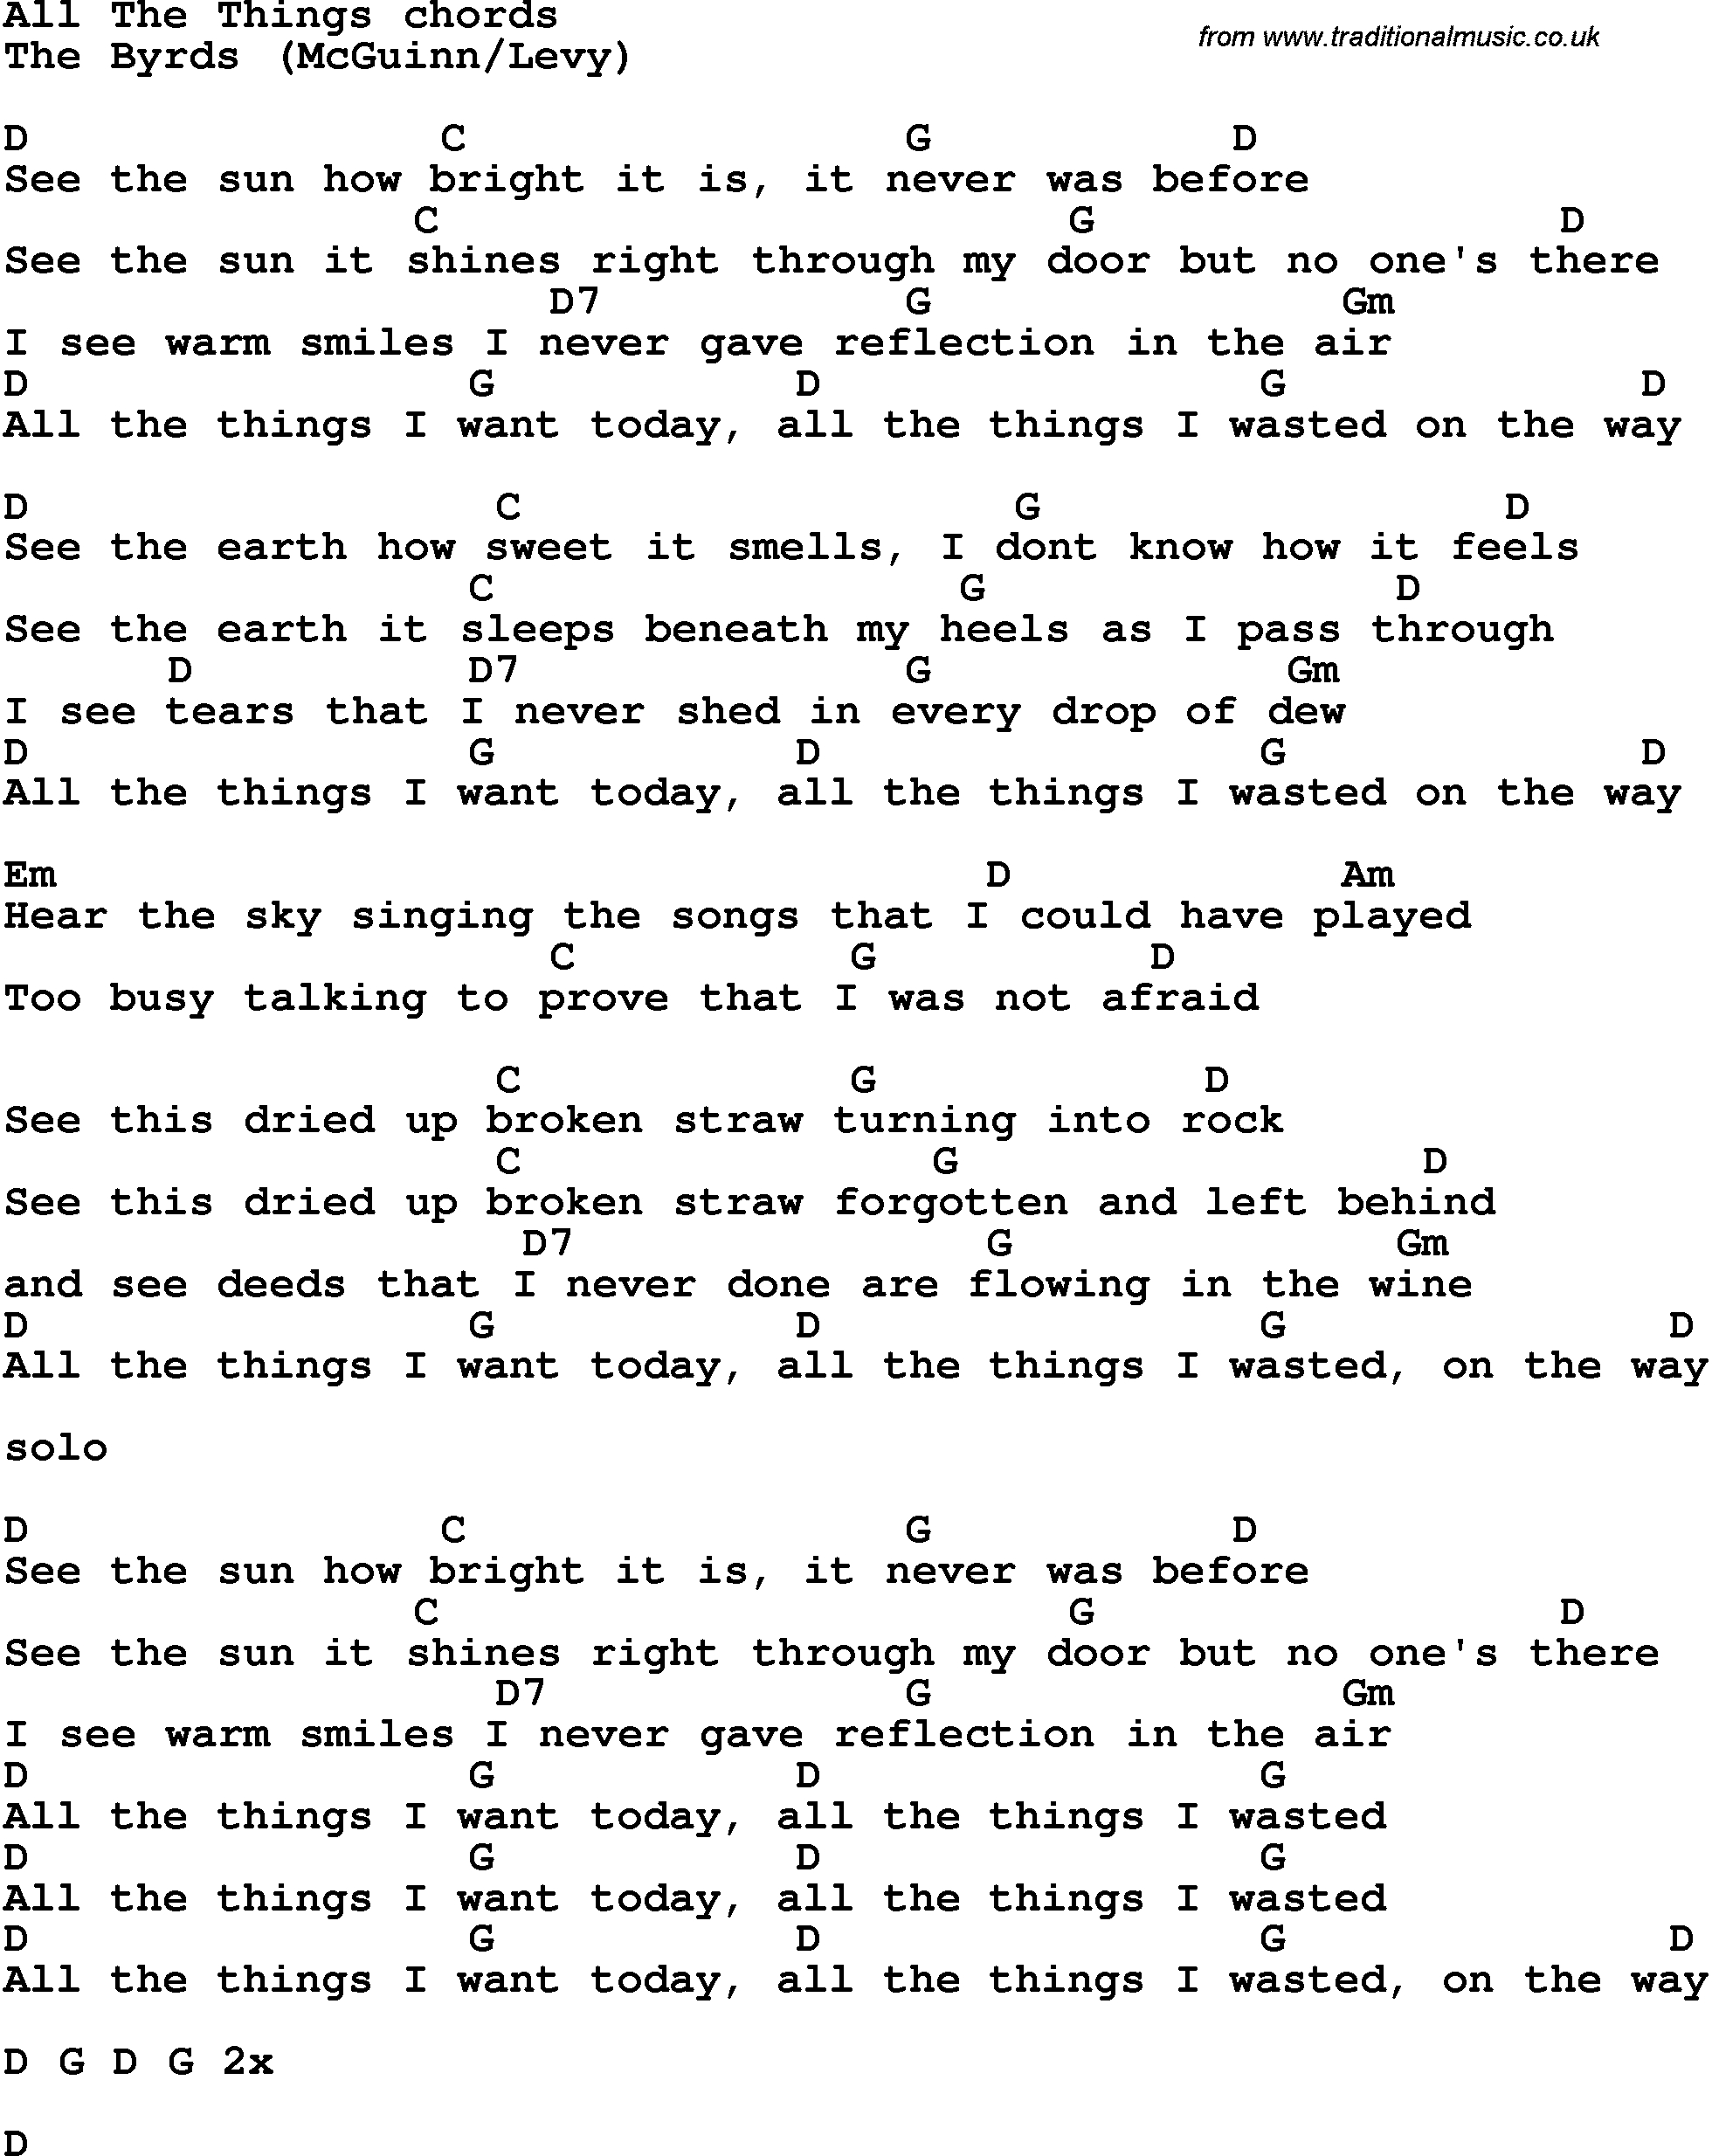 All Guitar Chords Song Lyrics With Guitar Chords For All The Things The Rds